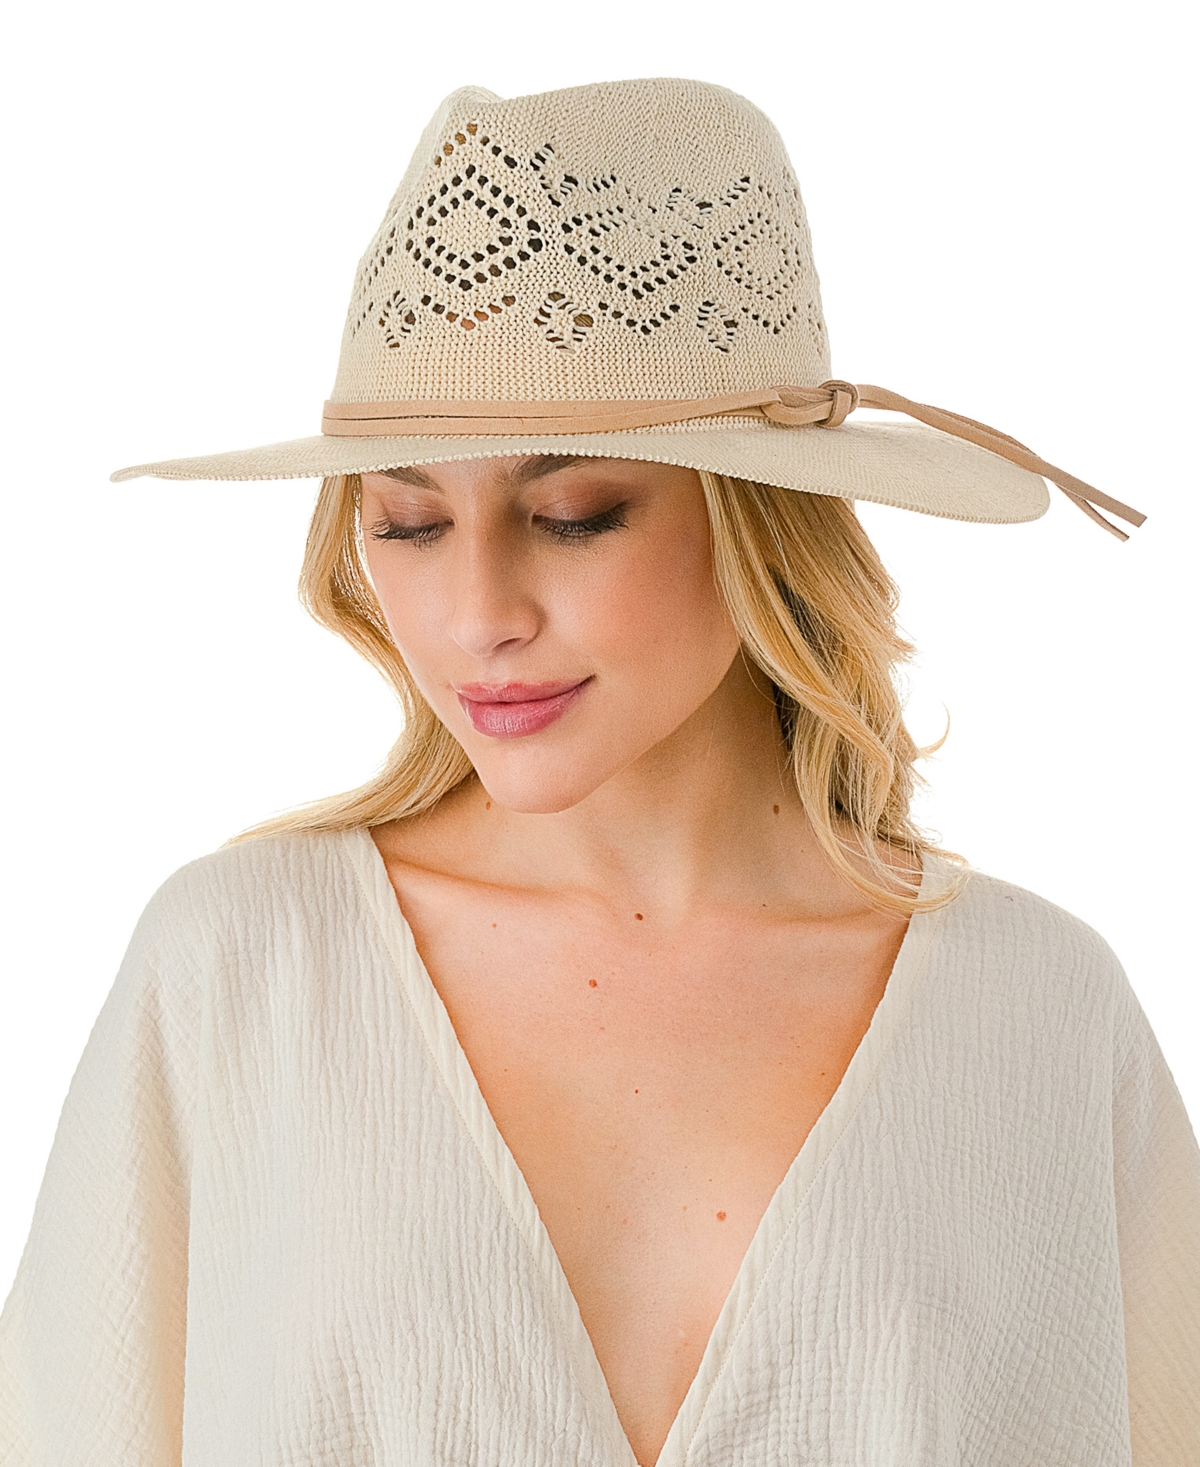 Marcus Adler Faux Trim With Packable Panama Hat In Light Tan